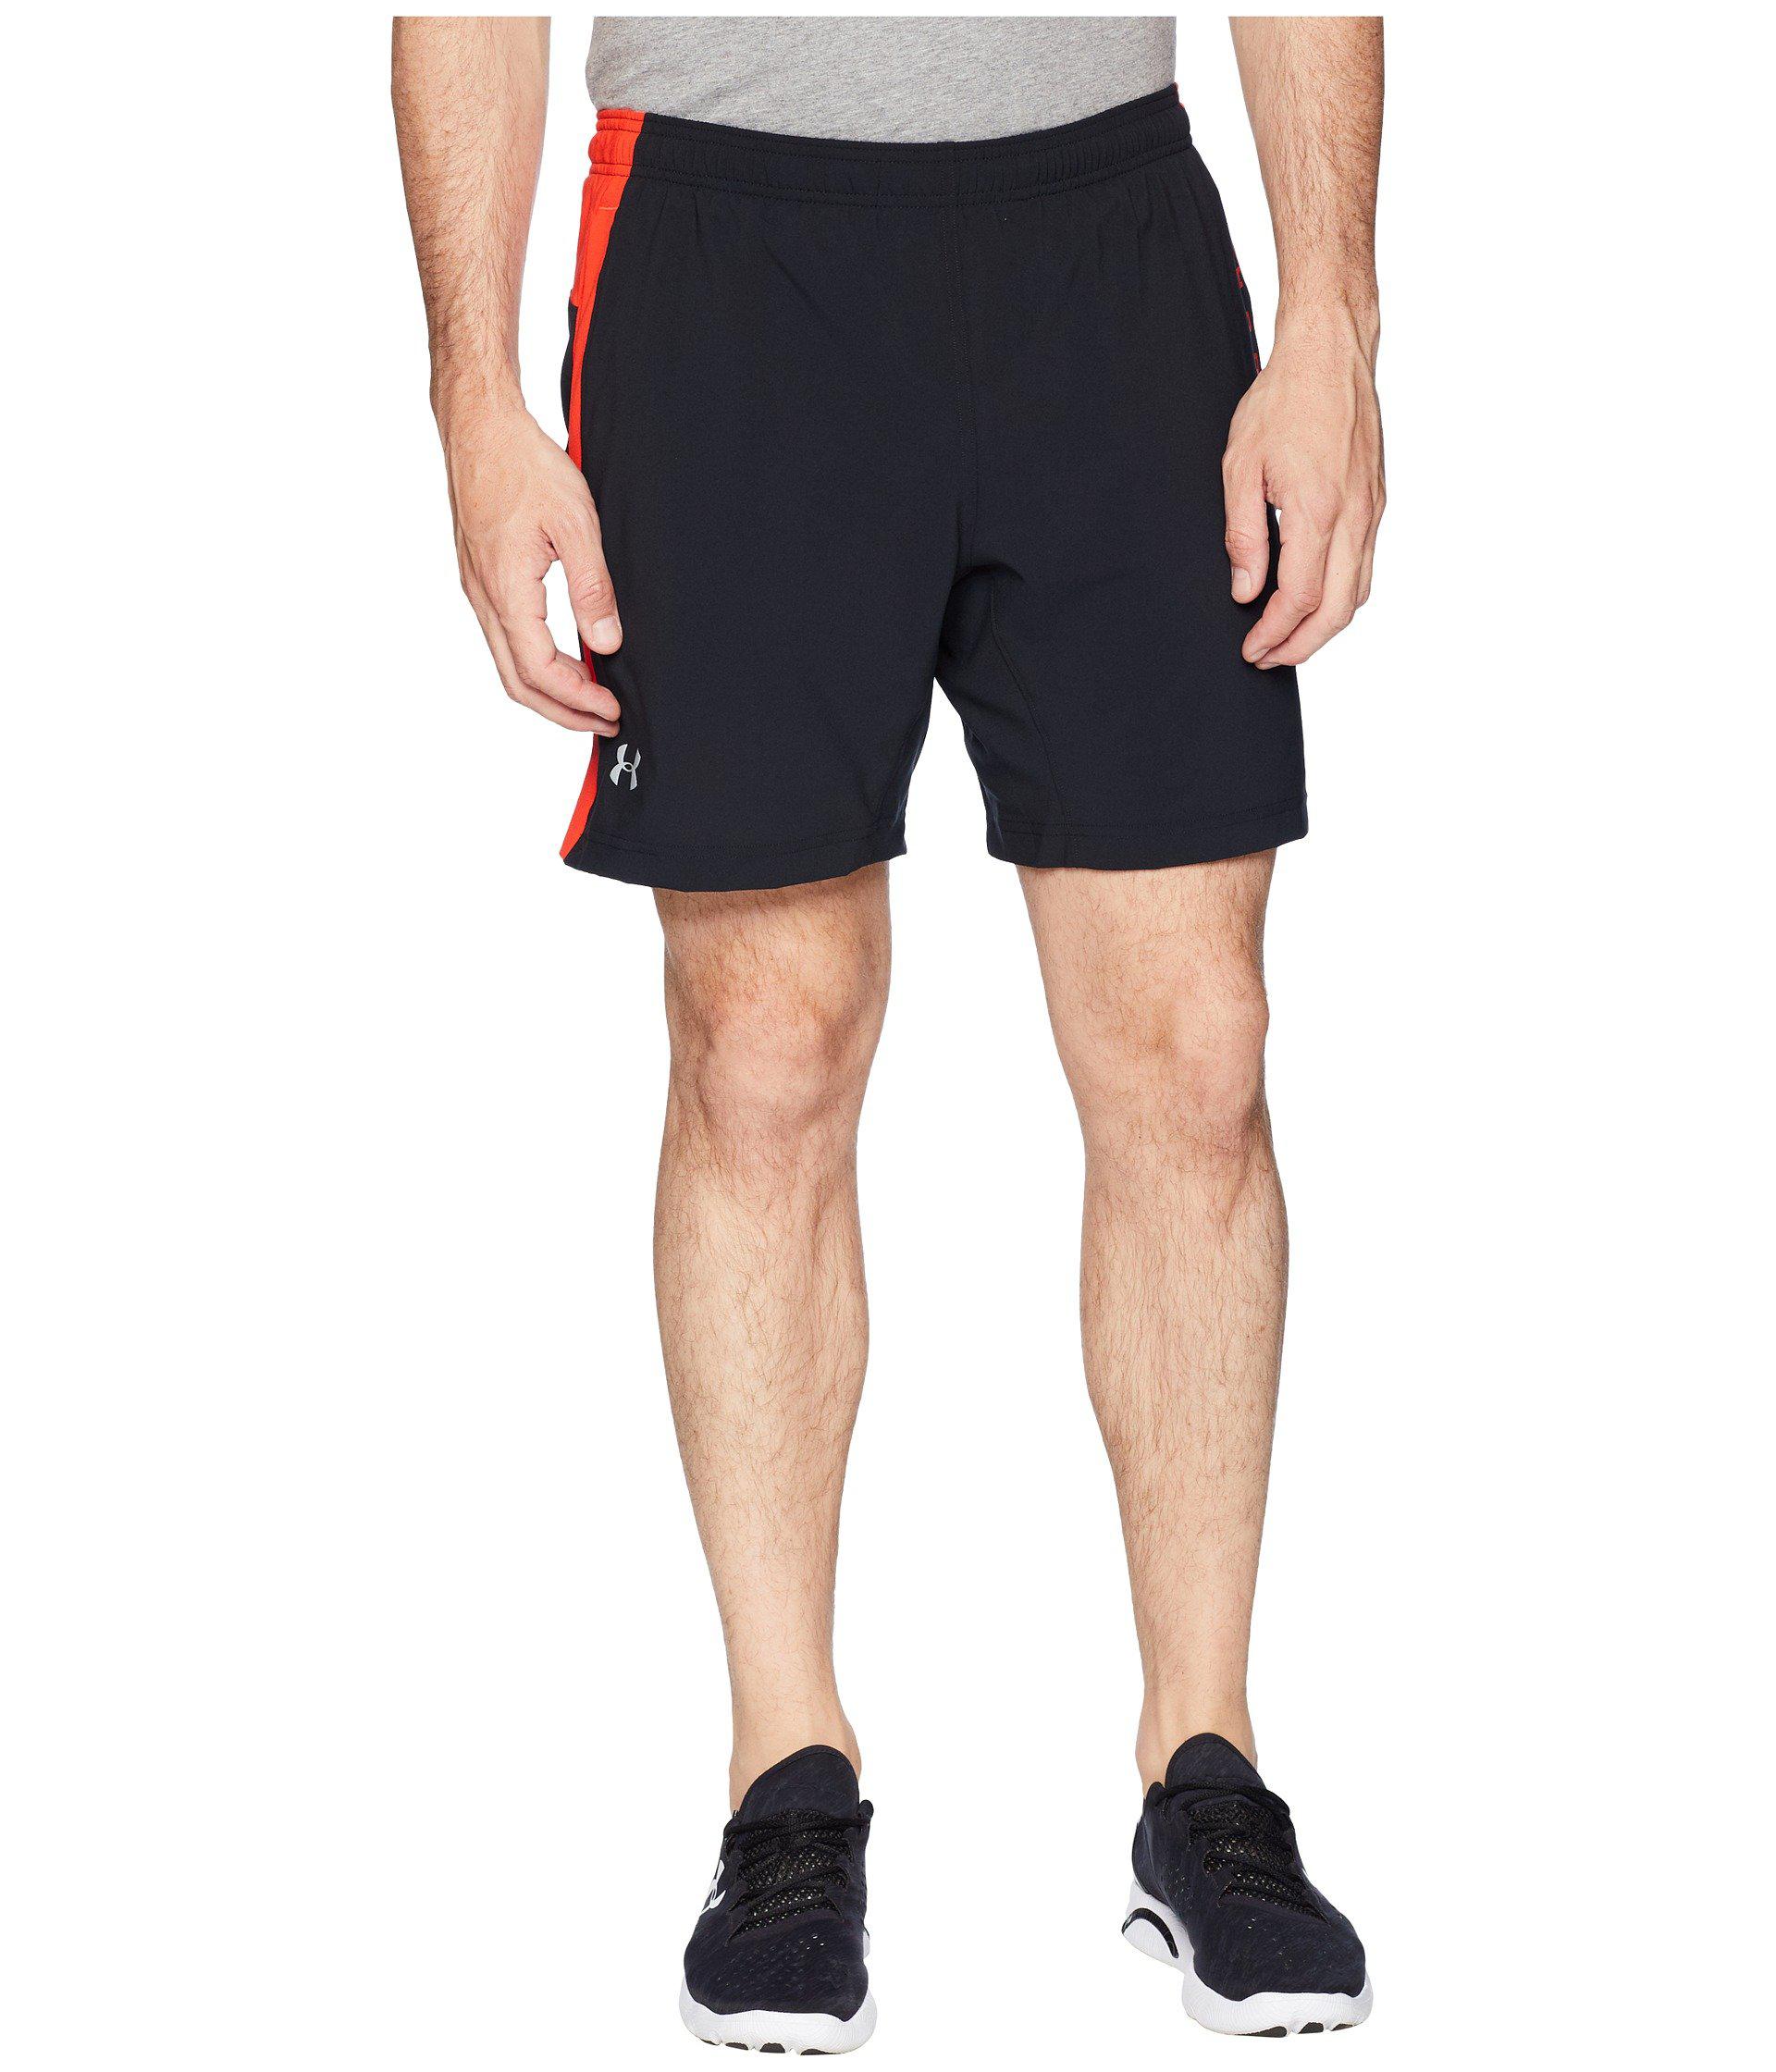 Download Lyst - Under Armour Launch Stretch Woven 2-in-1 Graphic ...